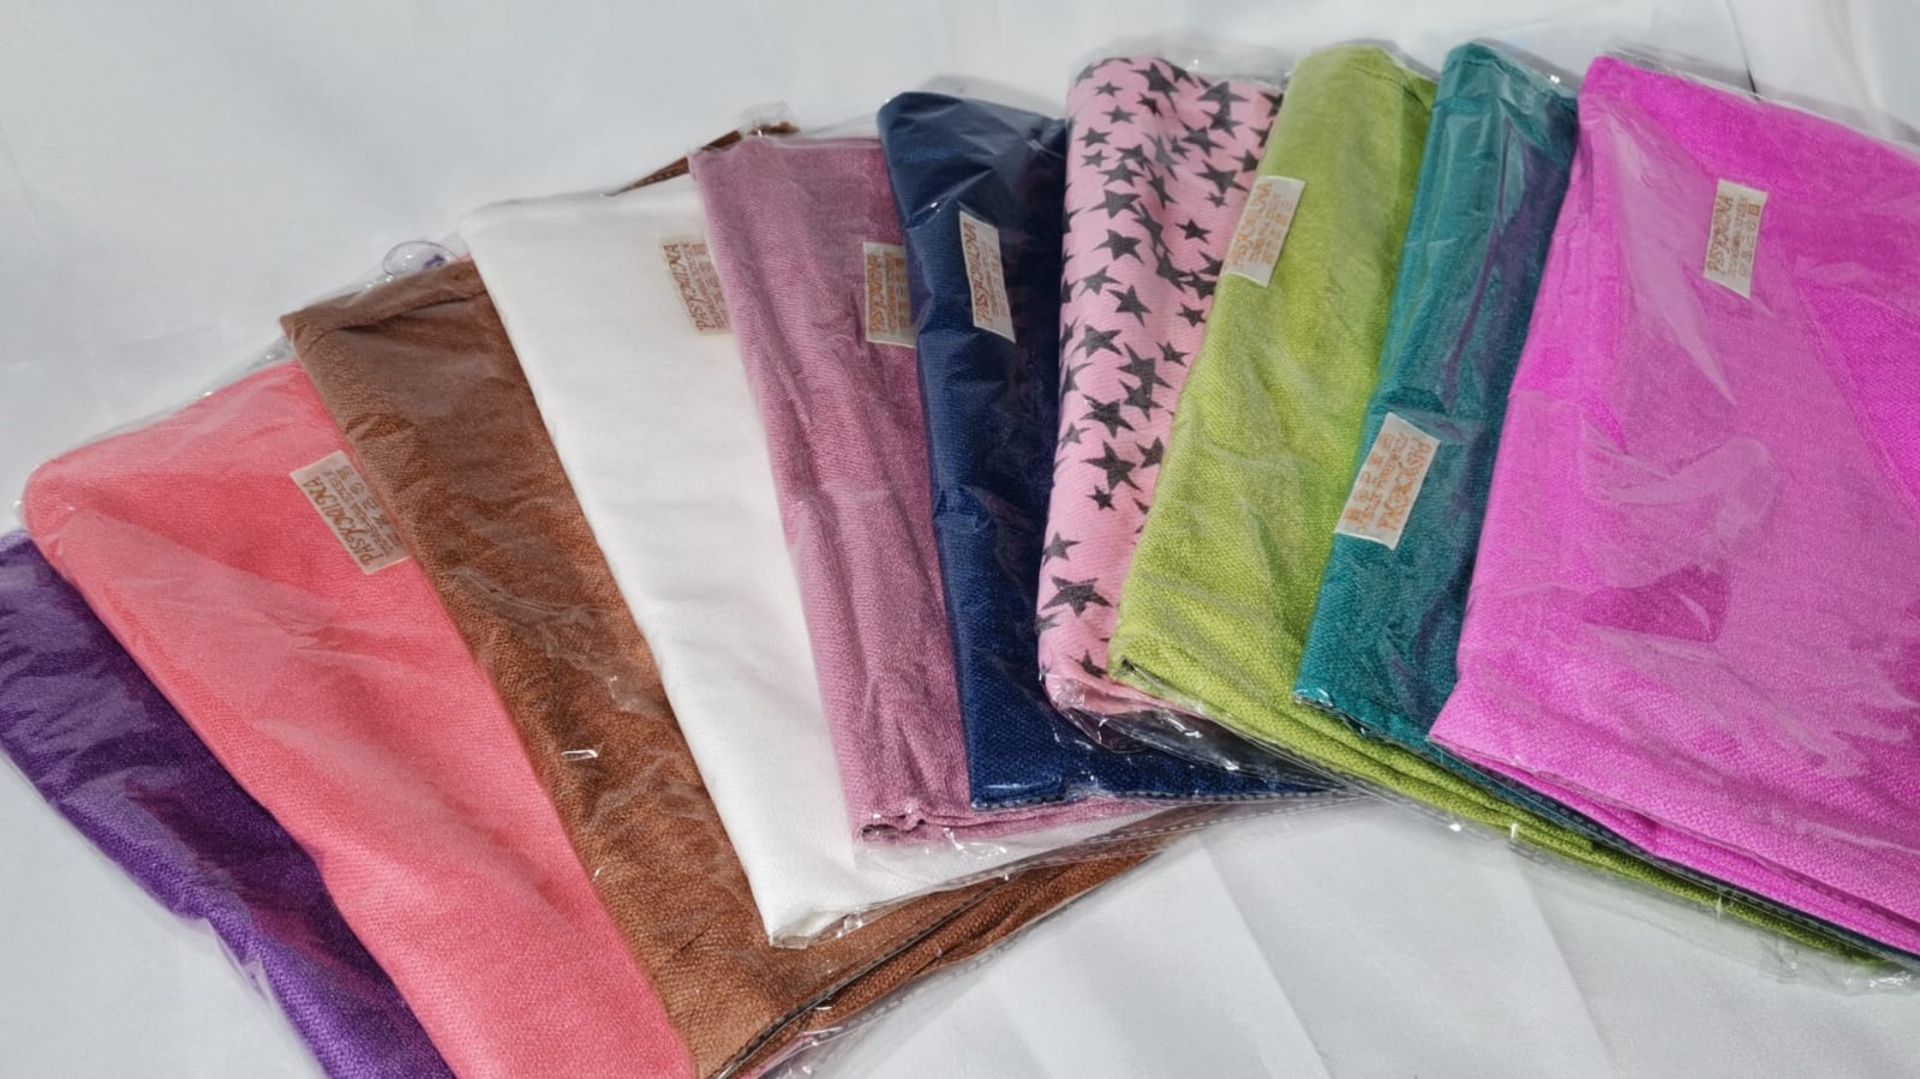 Variety of 10 Coloured / Patterned Pashmina Scarves. RRP £200 - Image 4 of 5